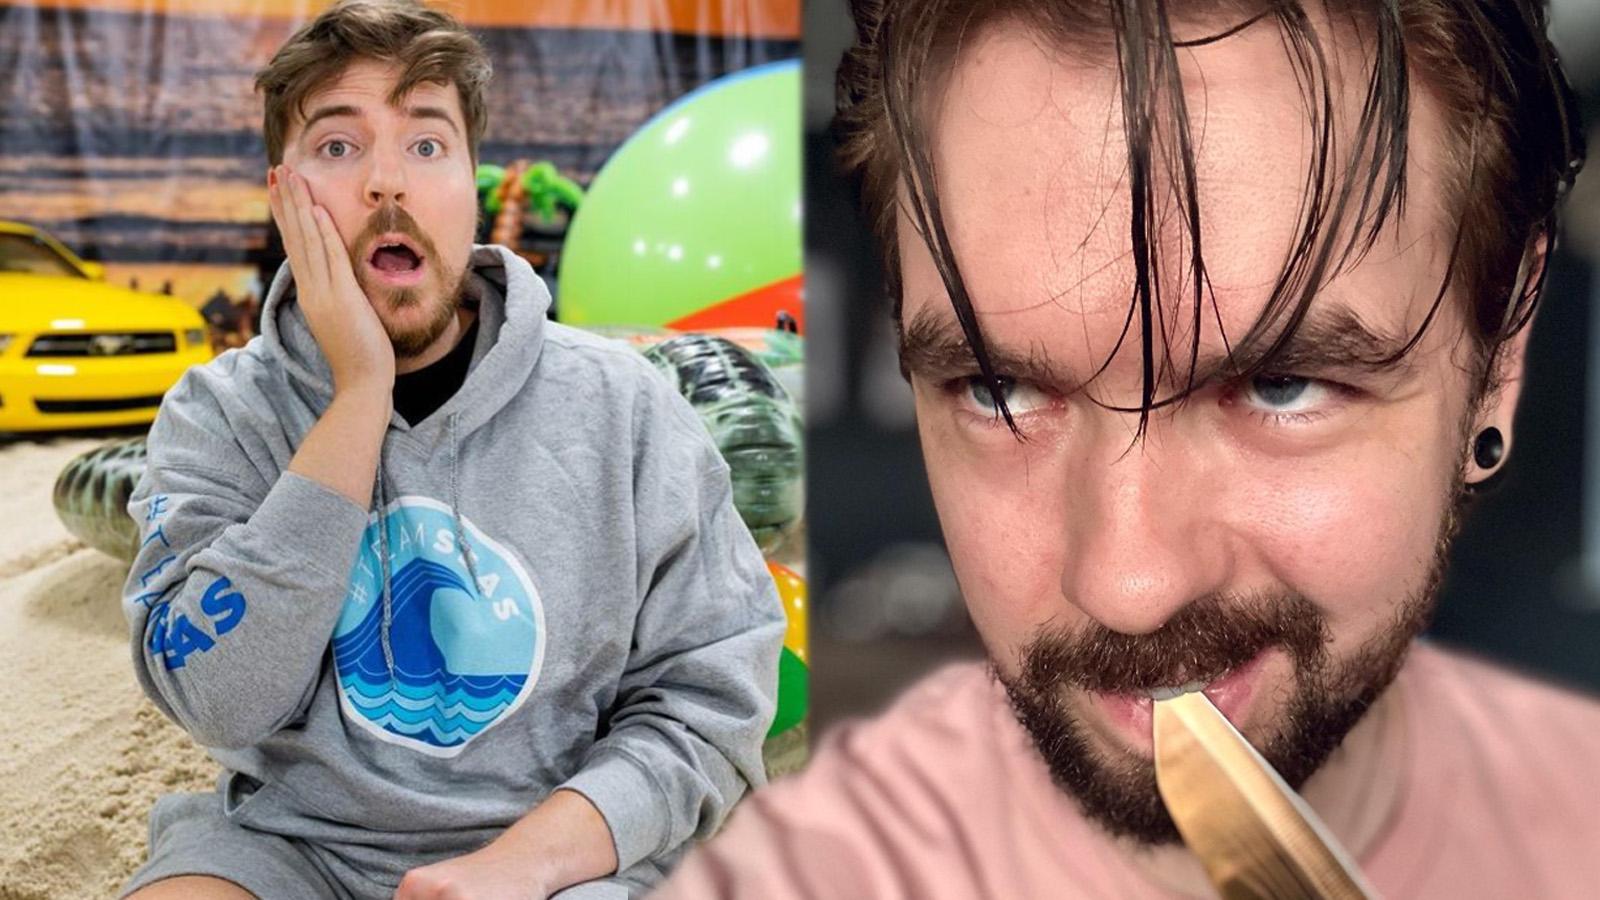 MrBeast claps back after Jacksepticeye claims he ruined YouTube